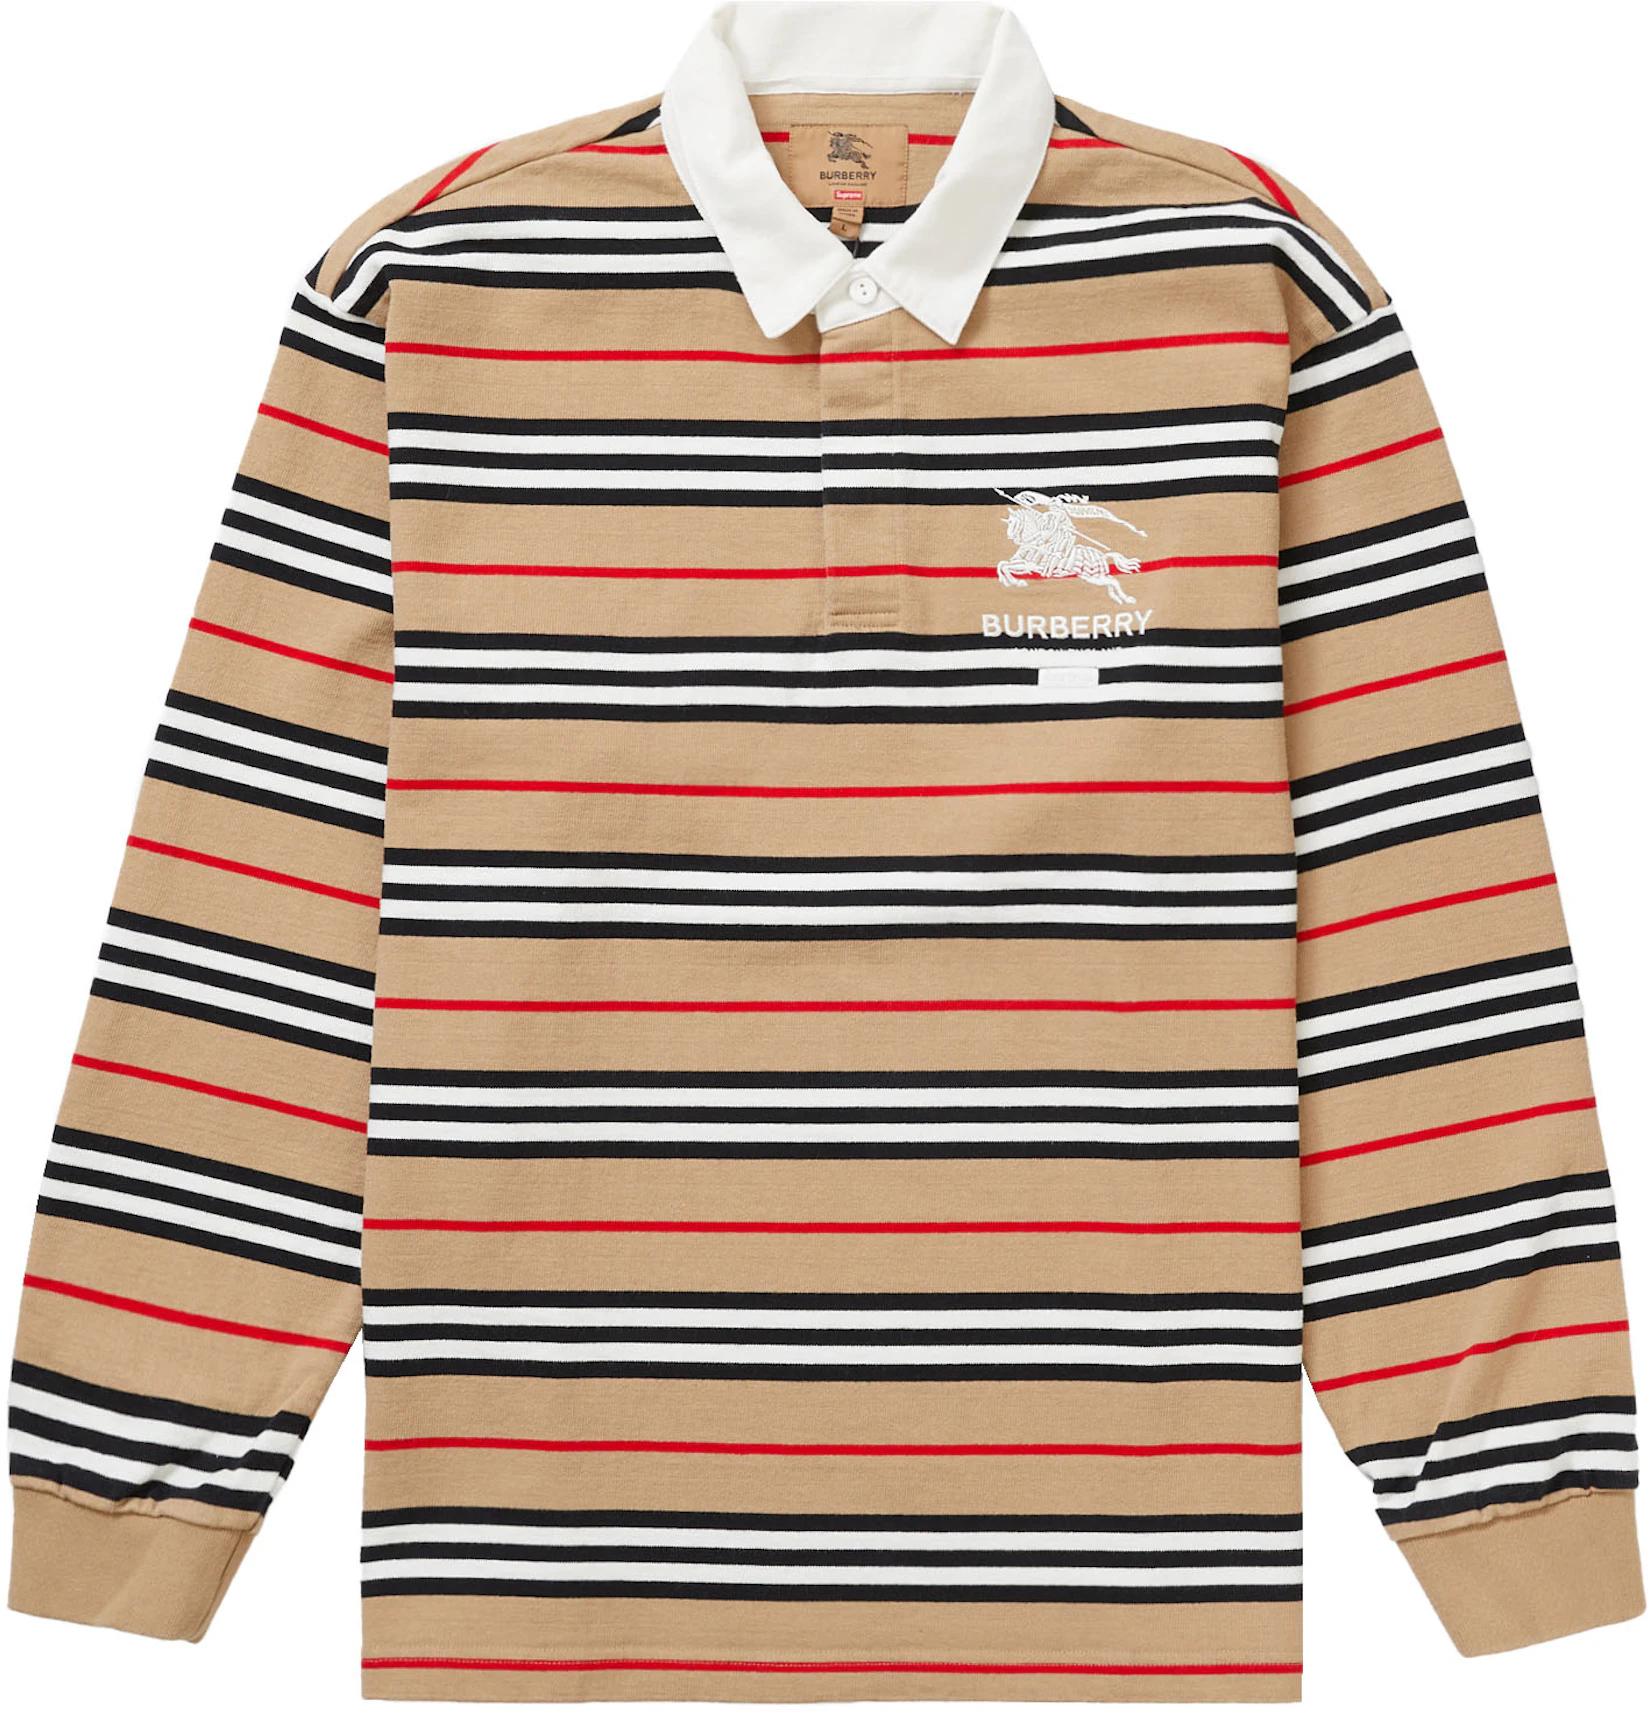 Introducir 31+ imagen supreme burberry rugby